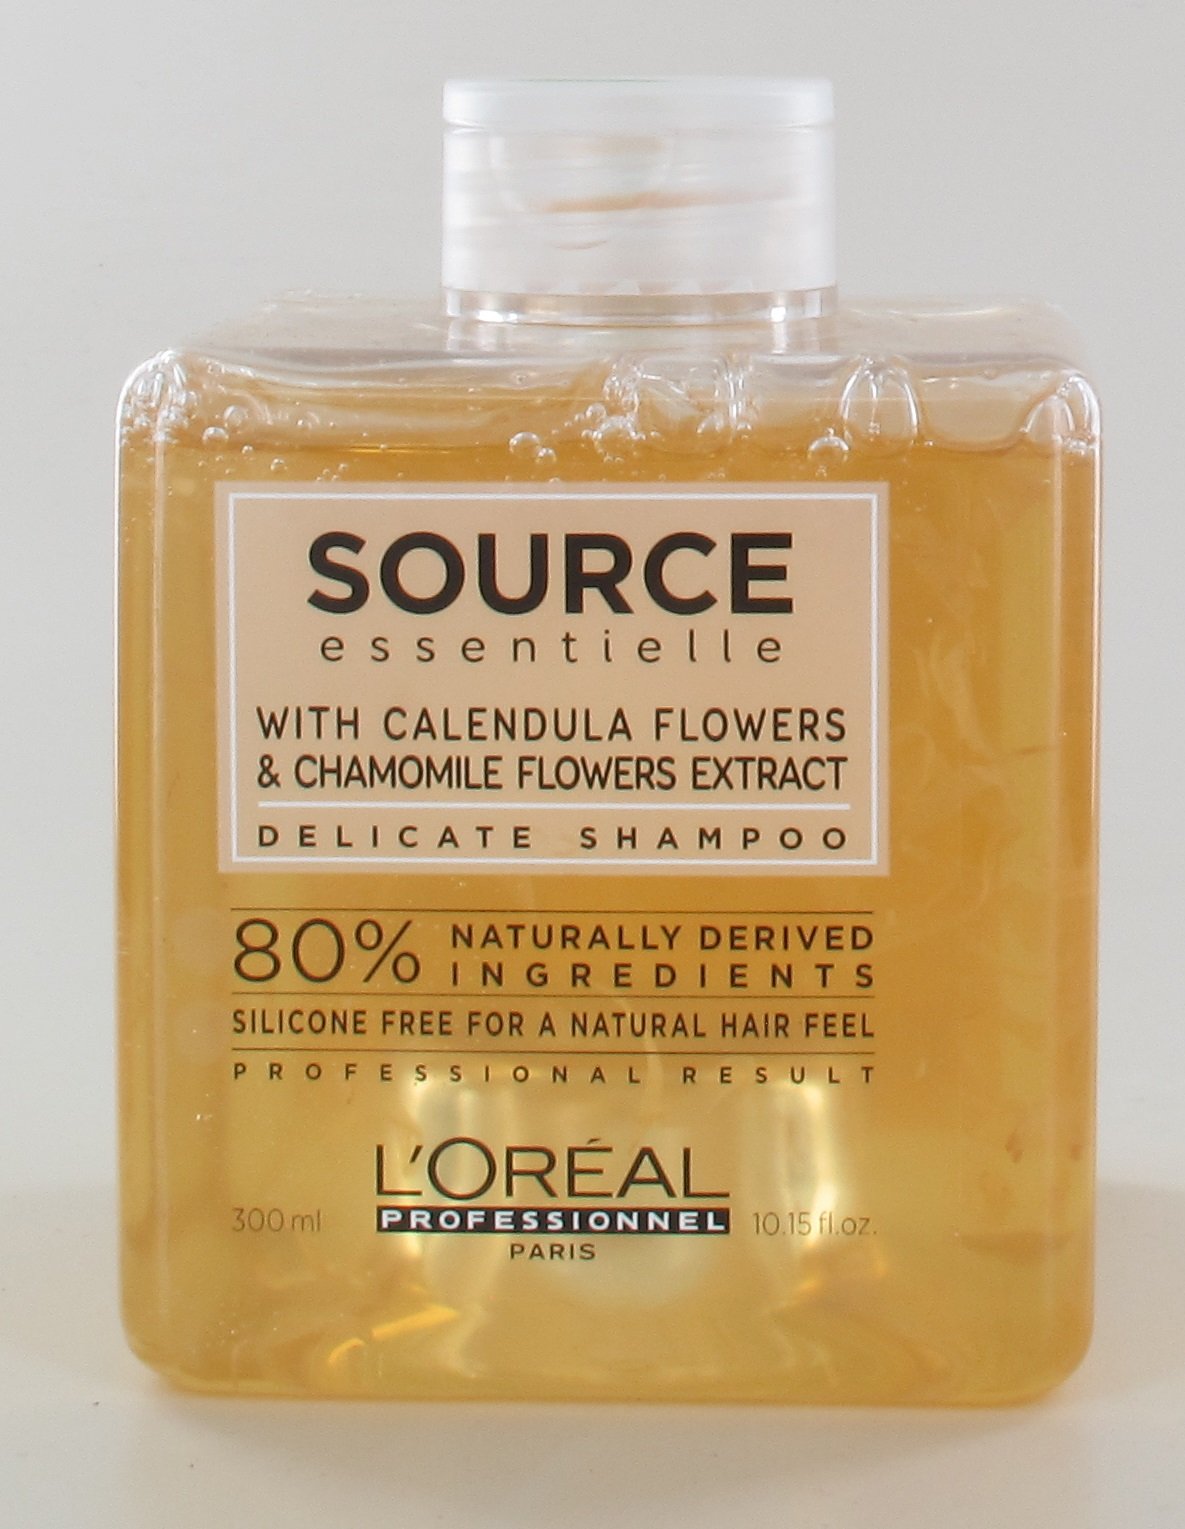 Loreal Source Essentielle With Calendula Flowers & Chamomile Flowers Extract Delicate Shampoo 10.15 Oz